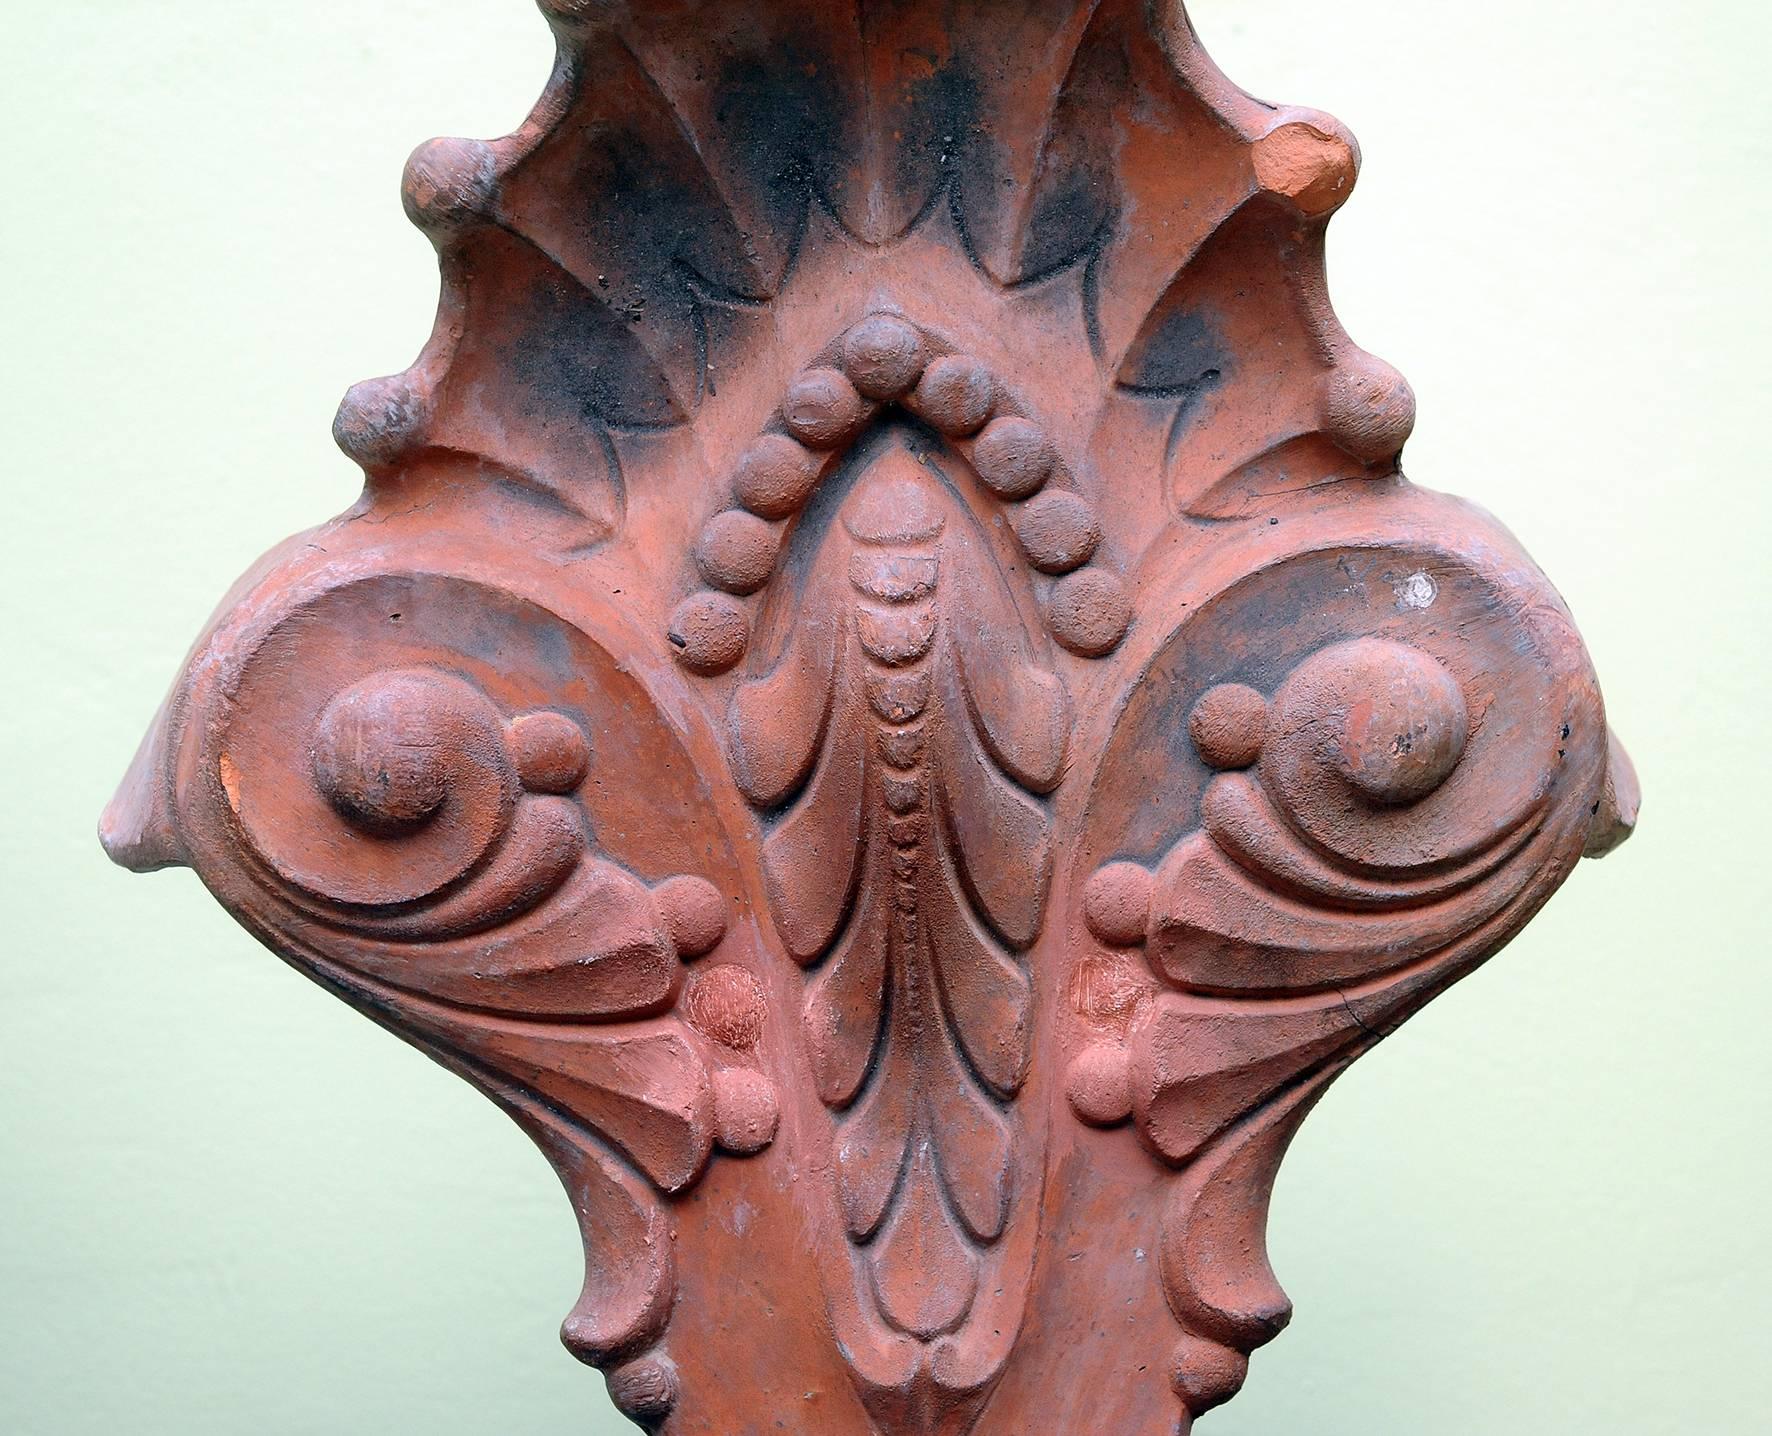 Pair of impressive designed ridge tiles mounted as a lamp,
terra cotta,
1900. 
Mounted on platinum.
One minor accident on top.